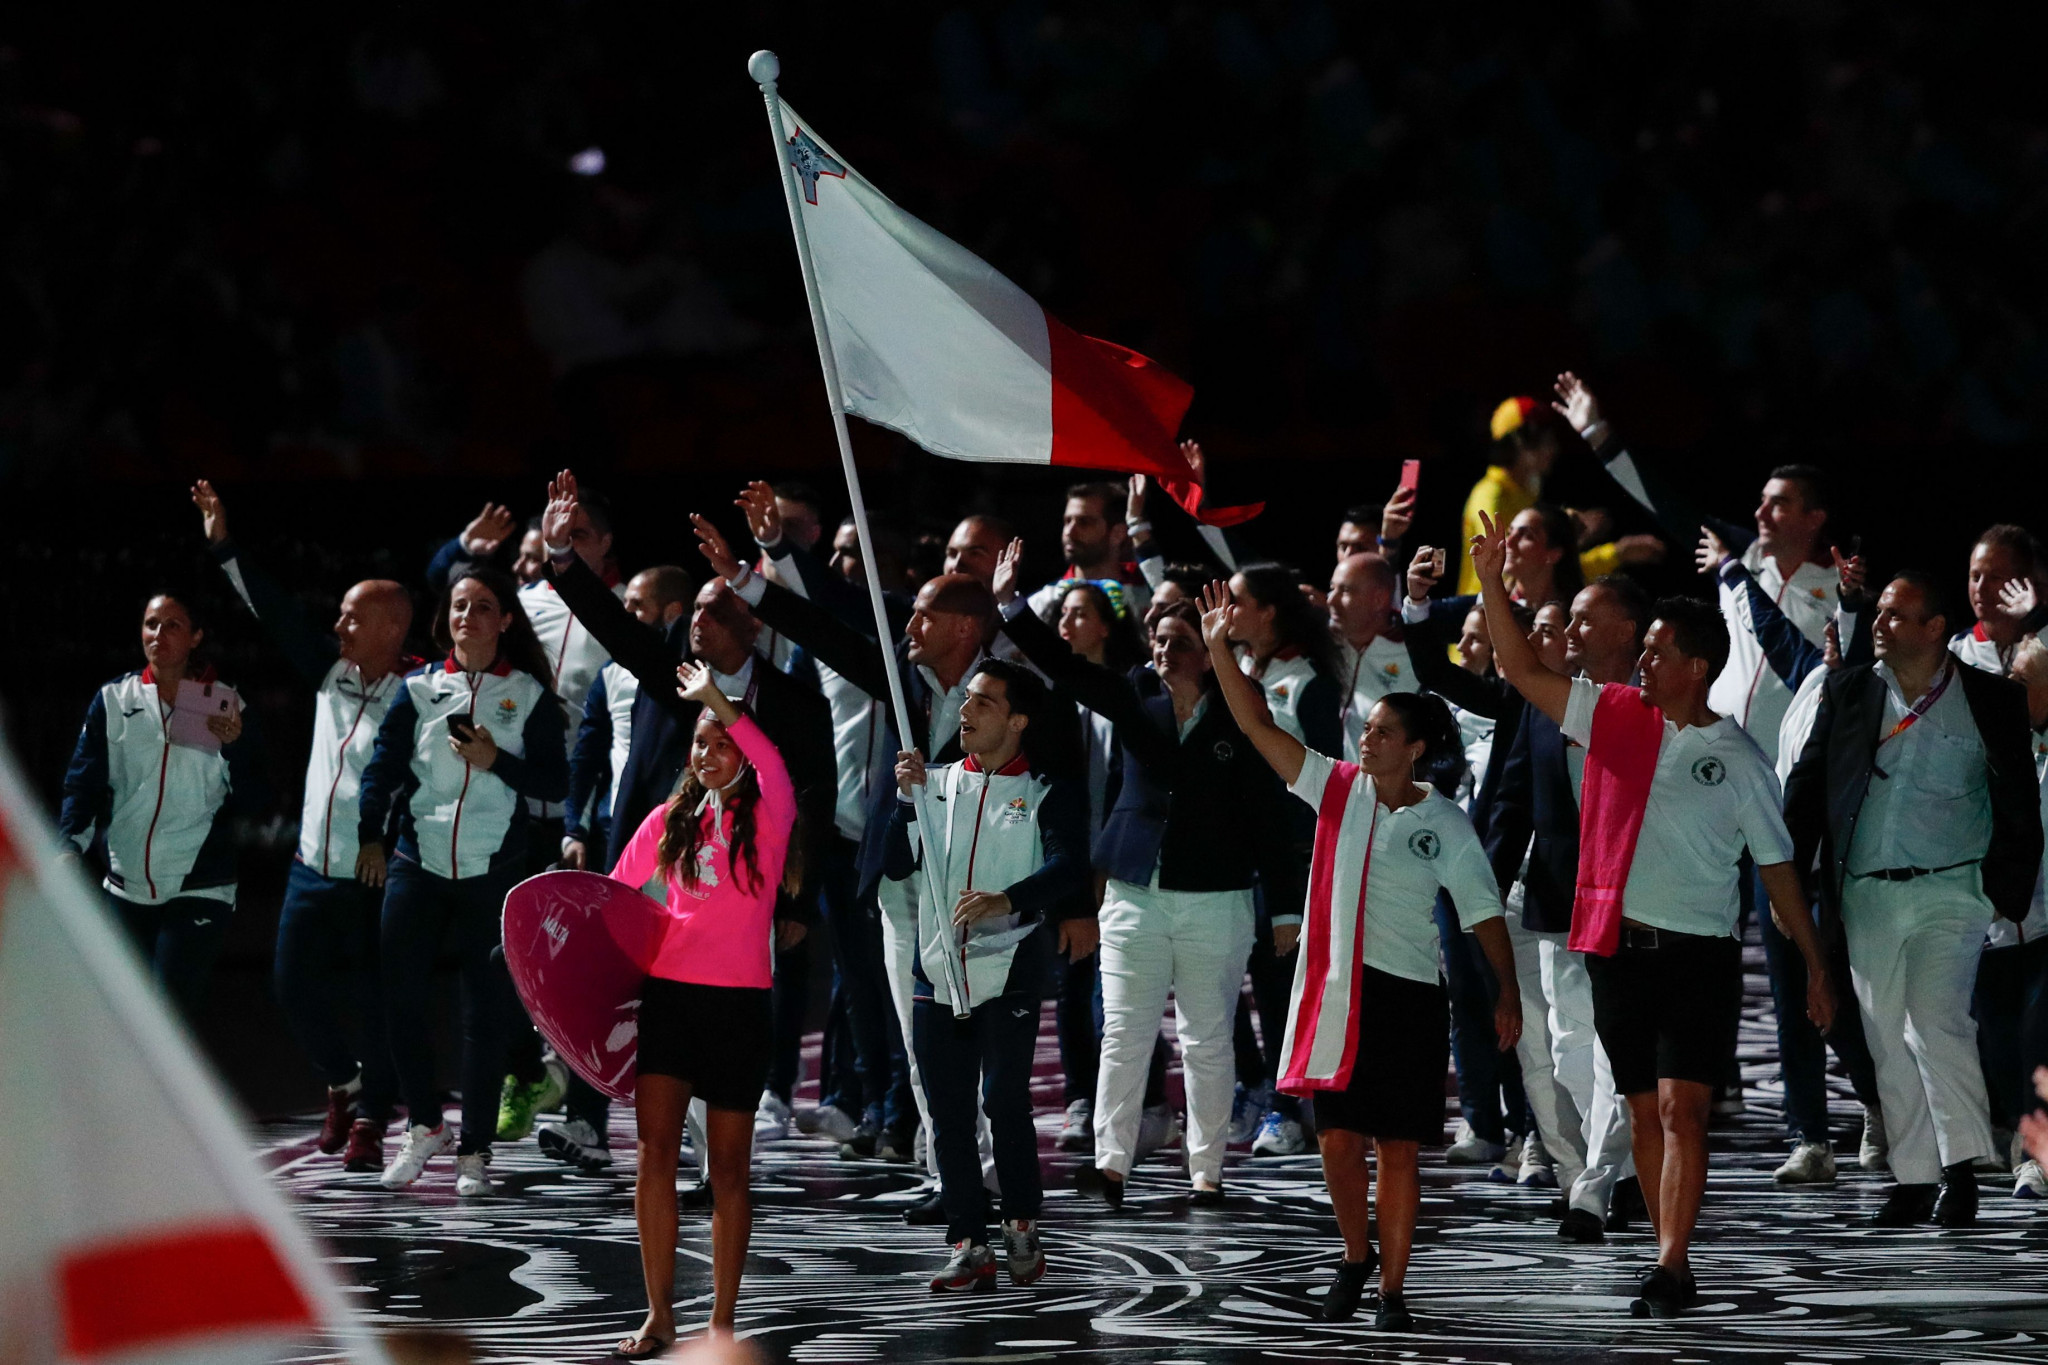 Malta won two bronze medals at the last Commonwealth Games in Gold Coast  ©Getty Images